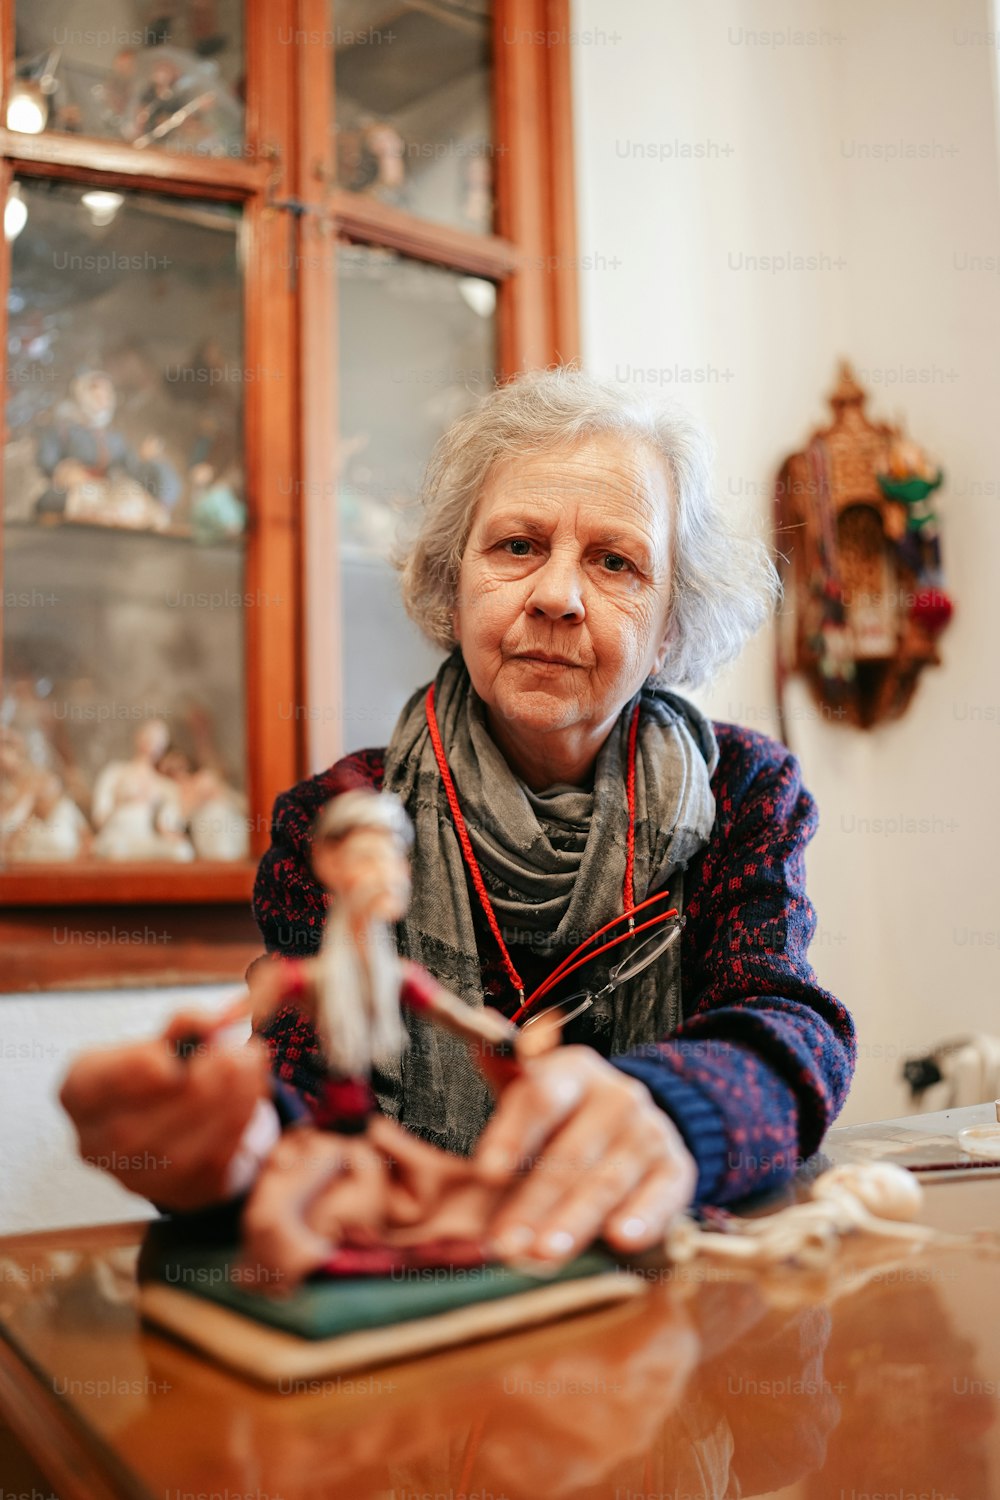 a woman sitting at a table with a doll in front of her